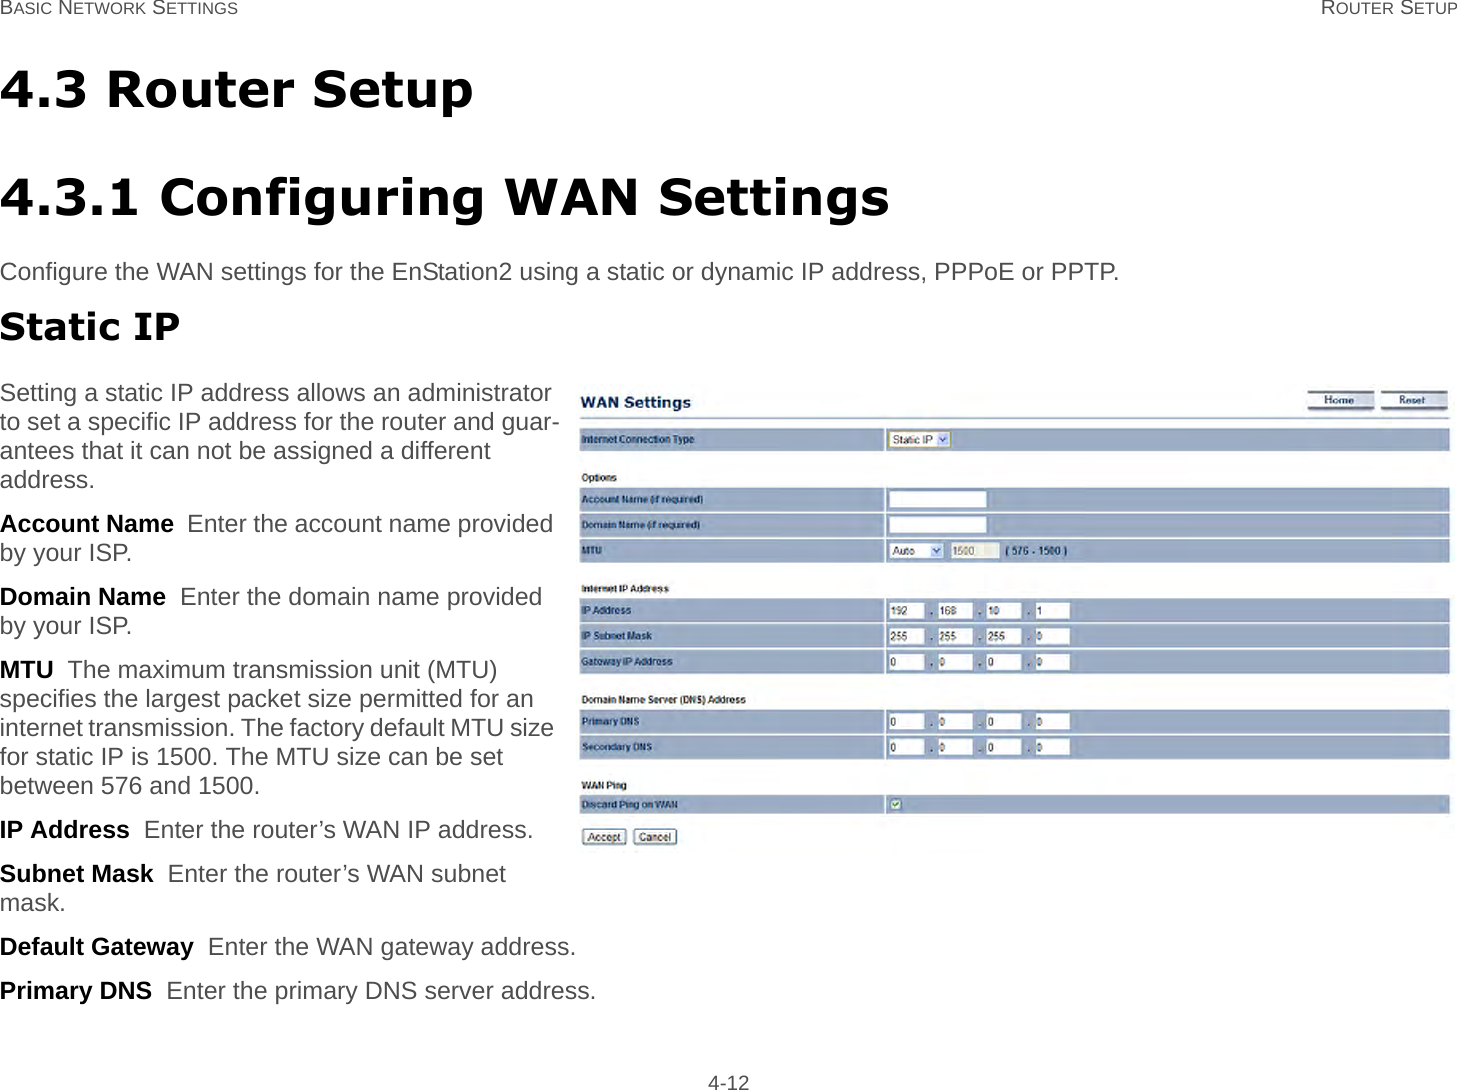 BASIC NETWORK SETTINGS ROUTER SETUP 4-124.3 Router Setup4.3.1 Configuring WAN SettingsConfigure the WAN settings for the EnStation2 using a static or dynamic IP address, PPPoE or PPTP.Static IPSetting a static IP address allows an administrator to set a specific IP address for the router and guar-antees that it can not be assigned a different address.Account Name  Enter the account name provided by your ISP.Domain Name  Enter the domain name provided by your ISP.MTU  The maximum transmission unit (MTU) specifies the largest packet size permitted for an internet transmission. The factory default MTU size for static IP is 1500. The MTU size can be set between 576 and 1500.IP Address  Enter the router’s WAN IP address.Subnet Mask  Enter the router’s WAN subnet mask.Default Gateway  Enter the WAN gateway address.Primary DNS  Enter the primary DNS server address.